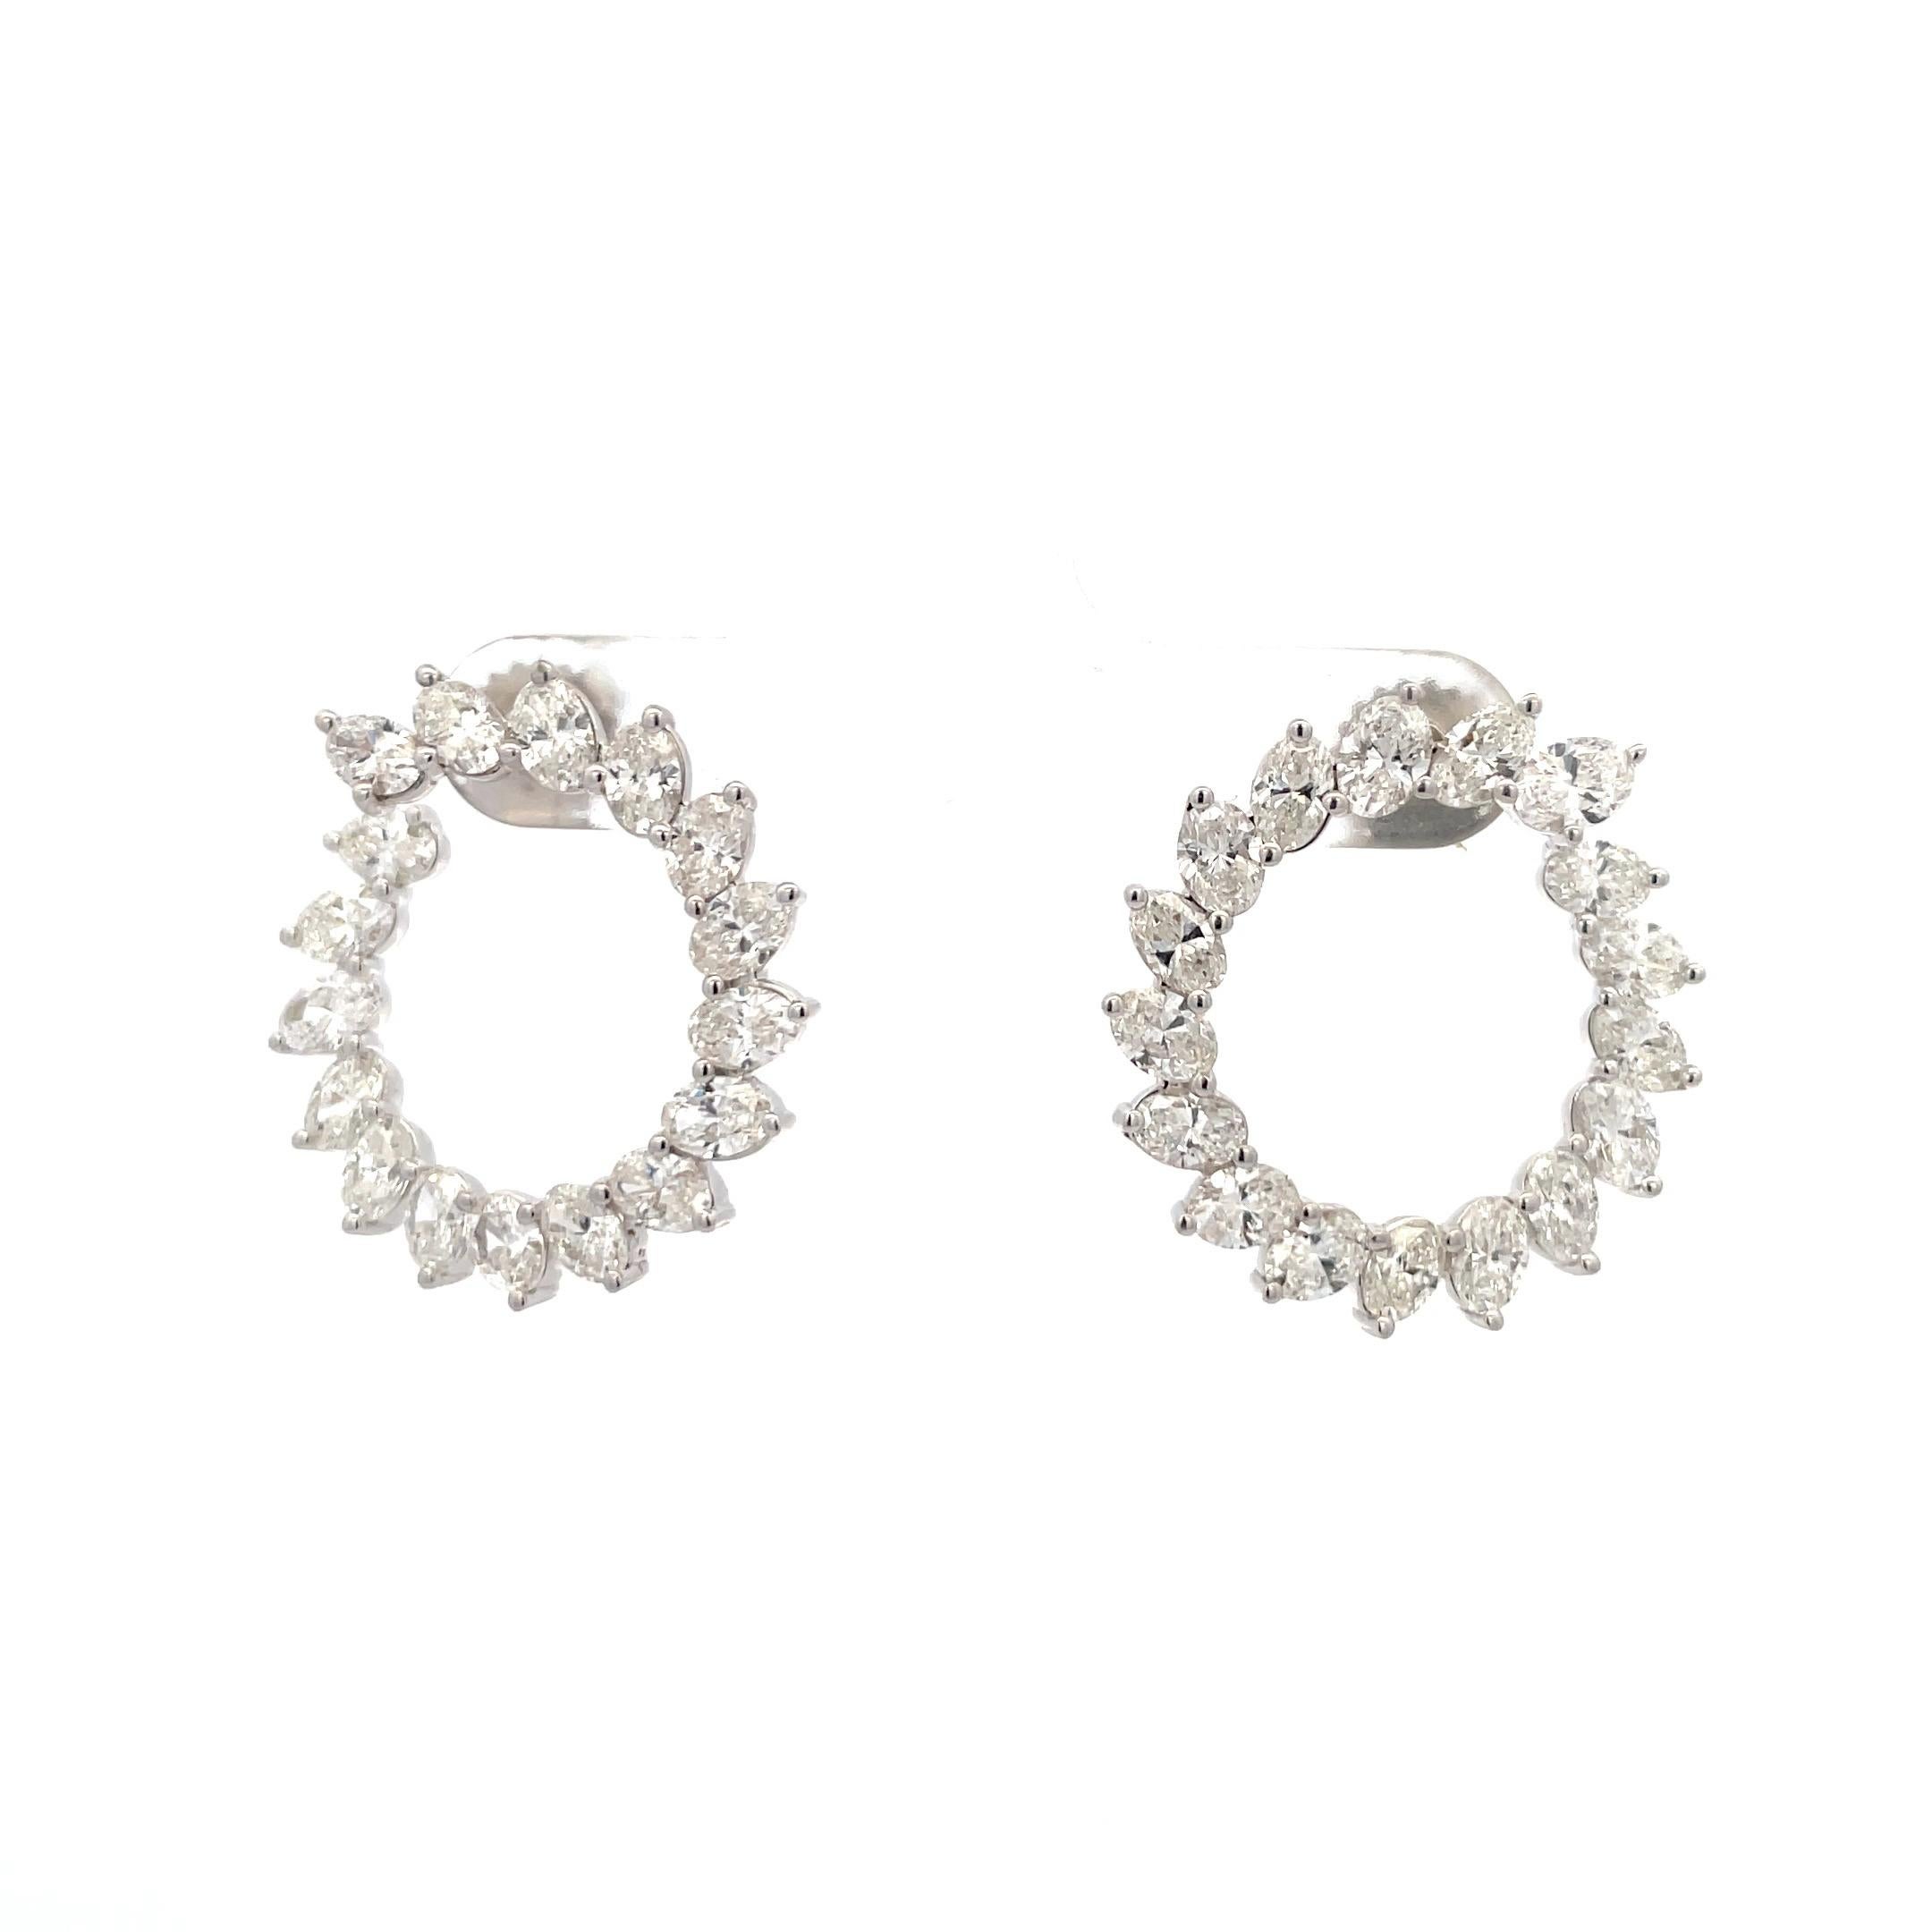 Crescent motif diamond hoop earrings featuring 34 Cushion cuts weighing 6.68 carats, in 18 karat white gold.
Average 0.20 Carats
Color G-H
Clarity VS1-VS2